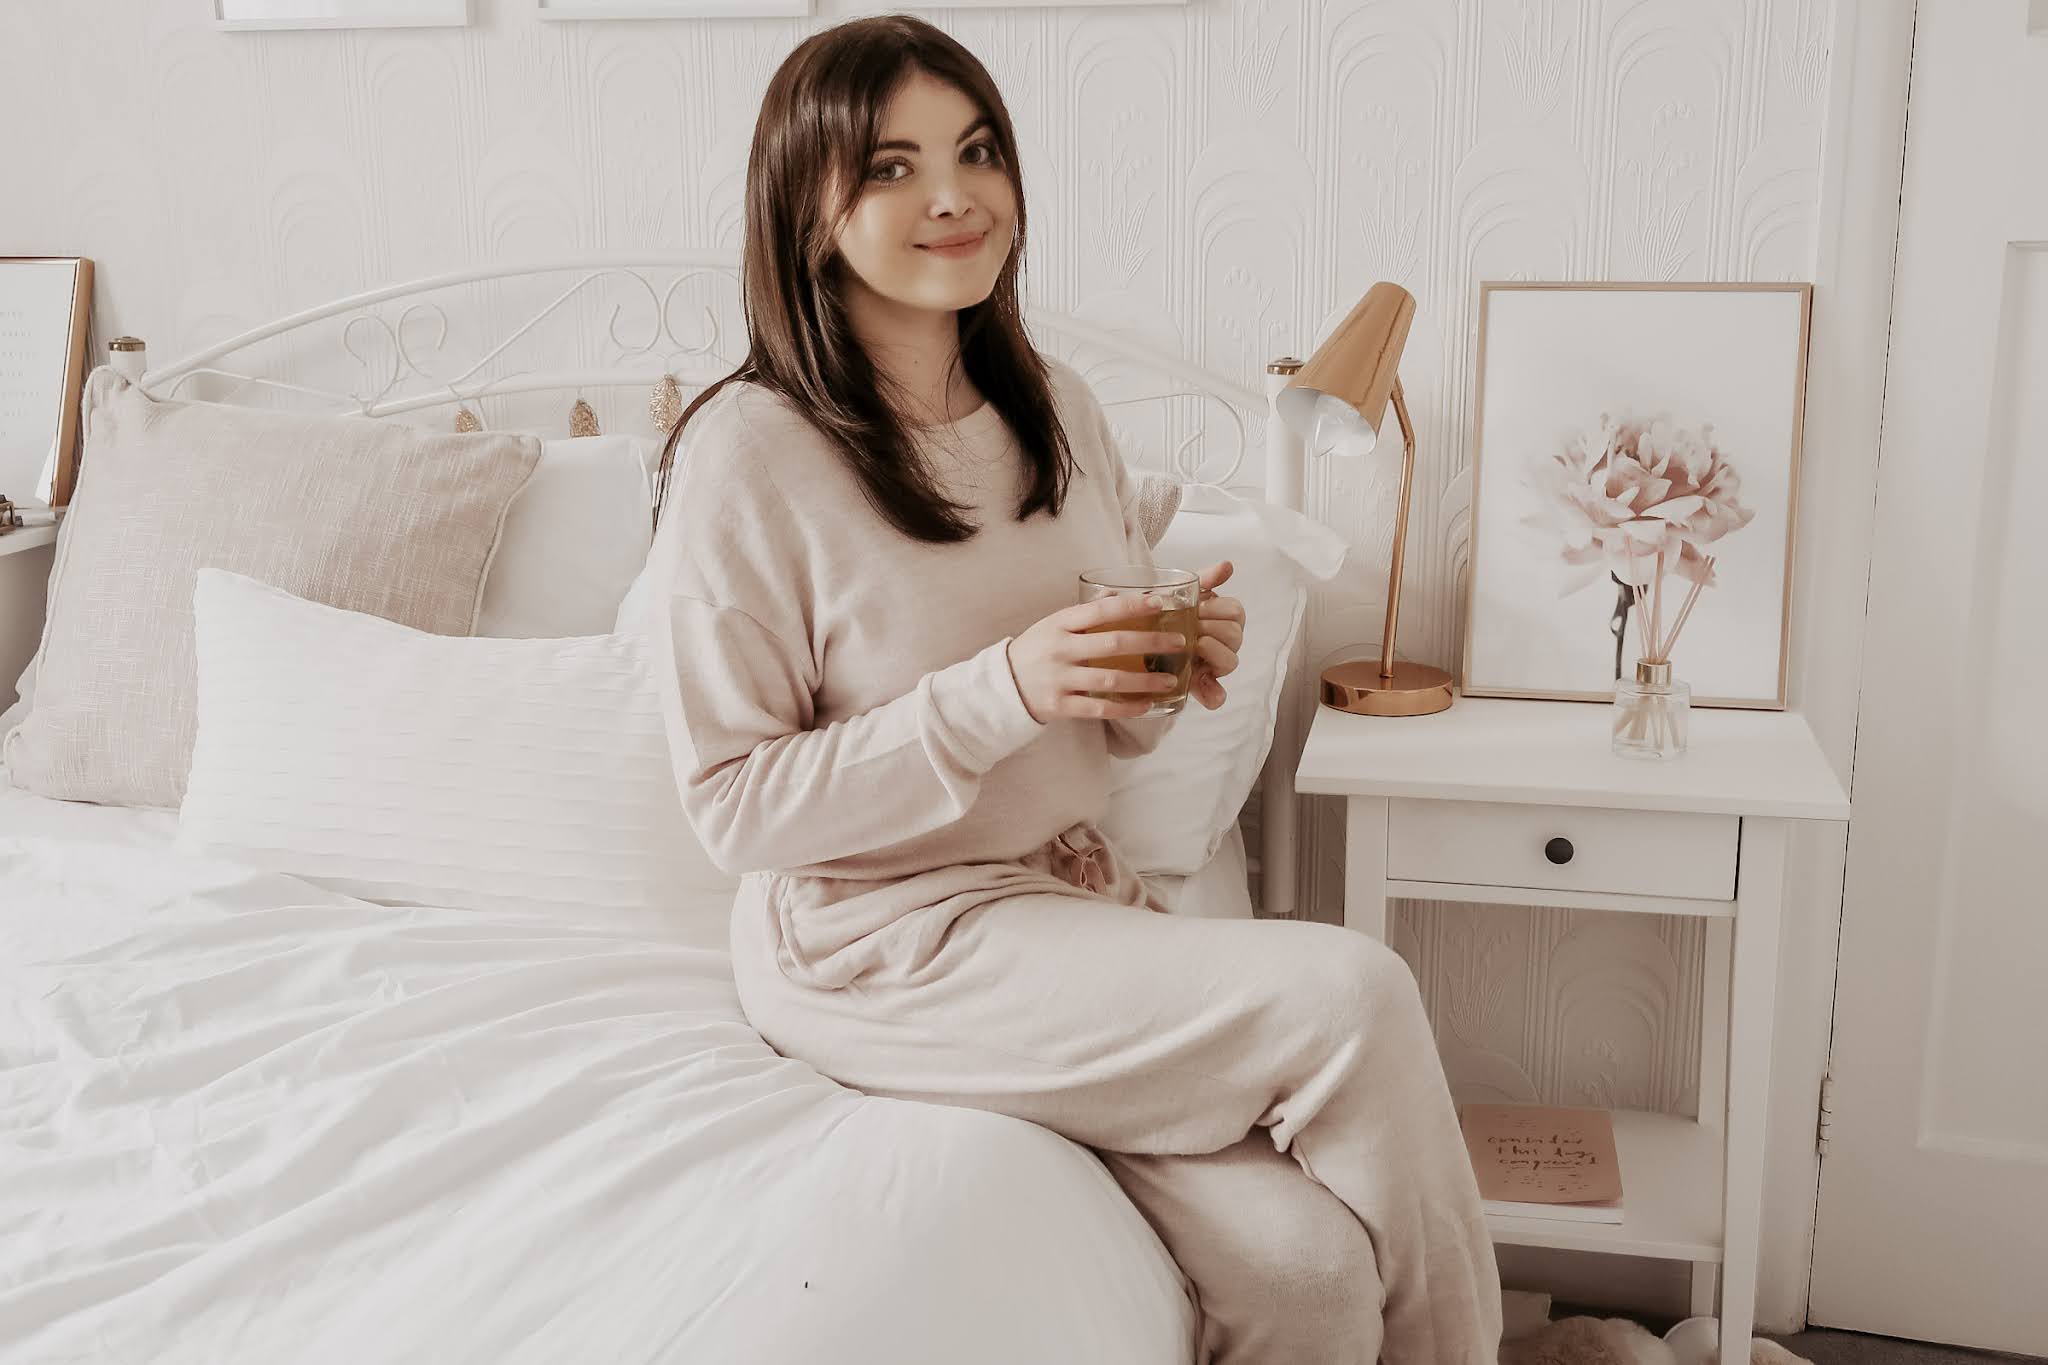 A woman sat on a bed holding a cup of tea.